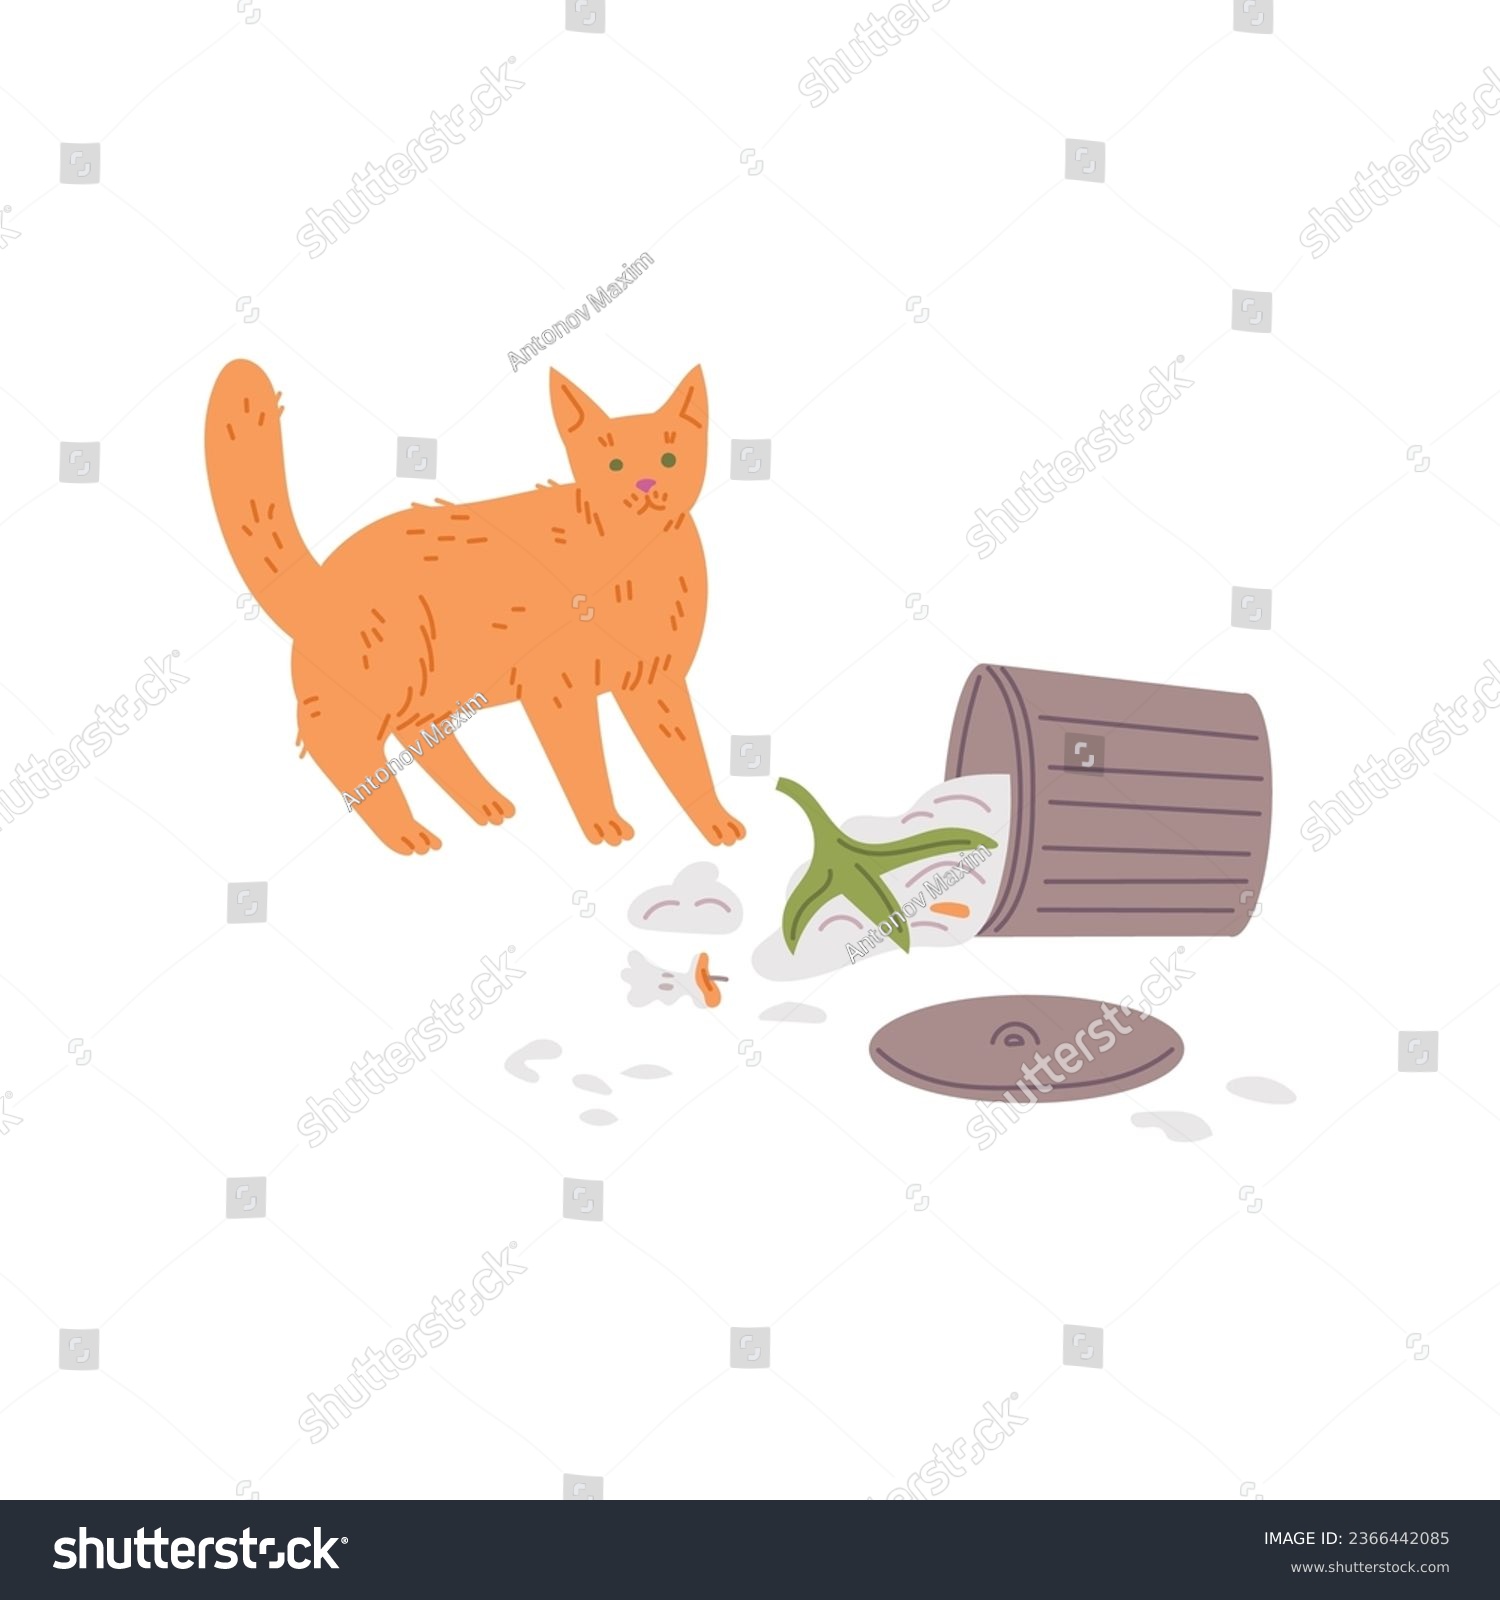 SVG of Overturned trash can, scattered garbage. Pet mess and clutter. Flat vector naughty ginger cat bad behavior illustration. Unacceptable inappropriate feline animal quirk isolated on white background svg